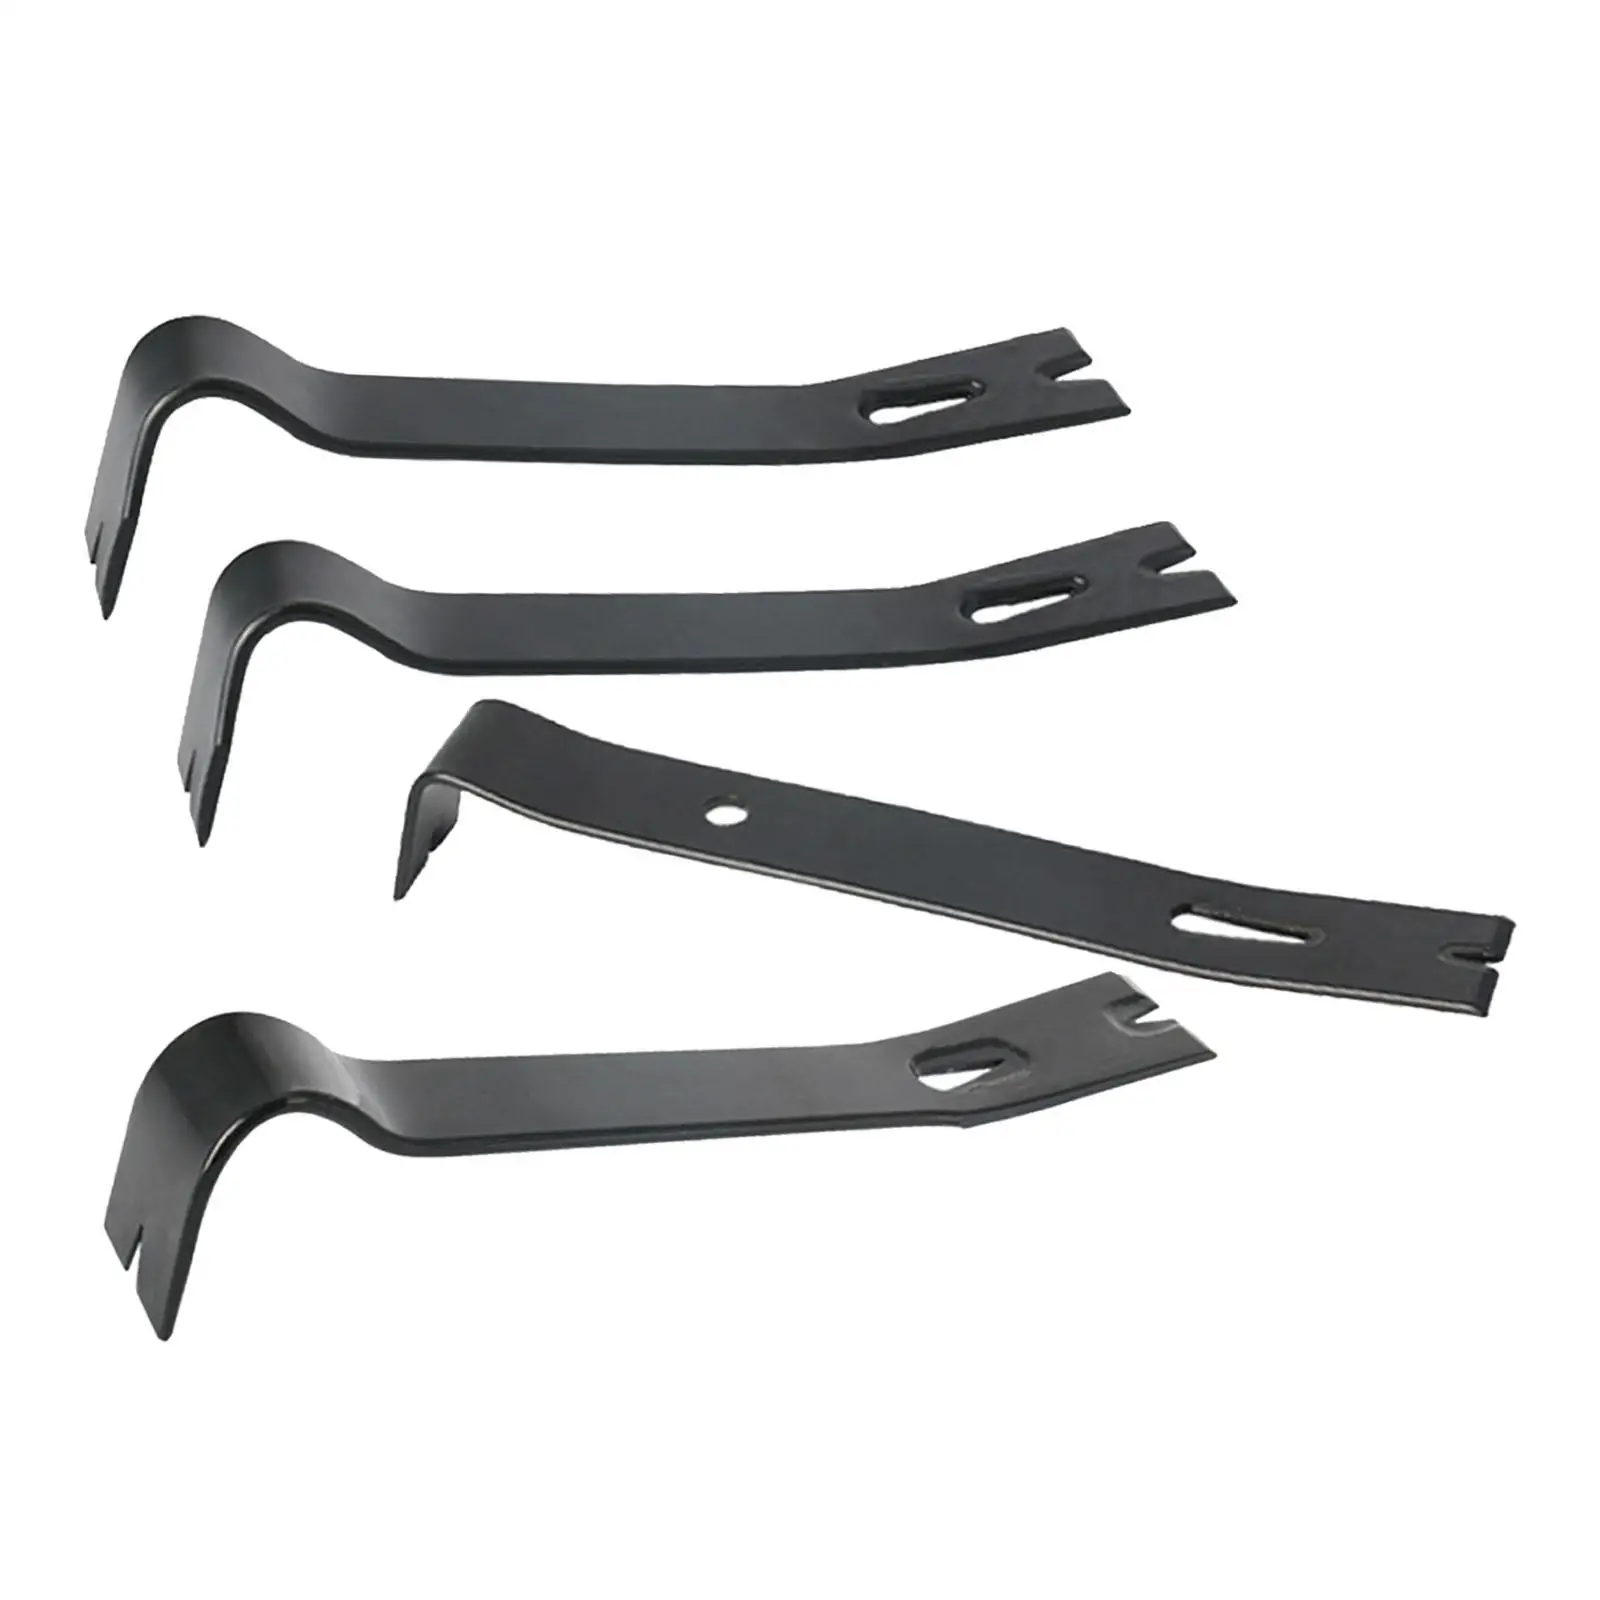 4x Pry Bars Durable Heavy Duty Staple Remover Mini Crowbar Nail Puller Flat Pry Bar Set for Nail Pulling Lifting Household